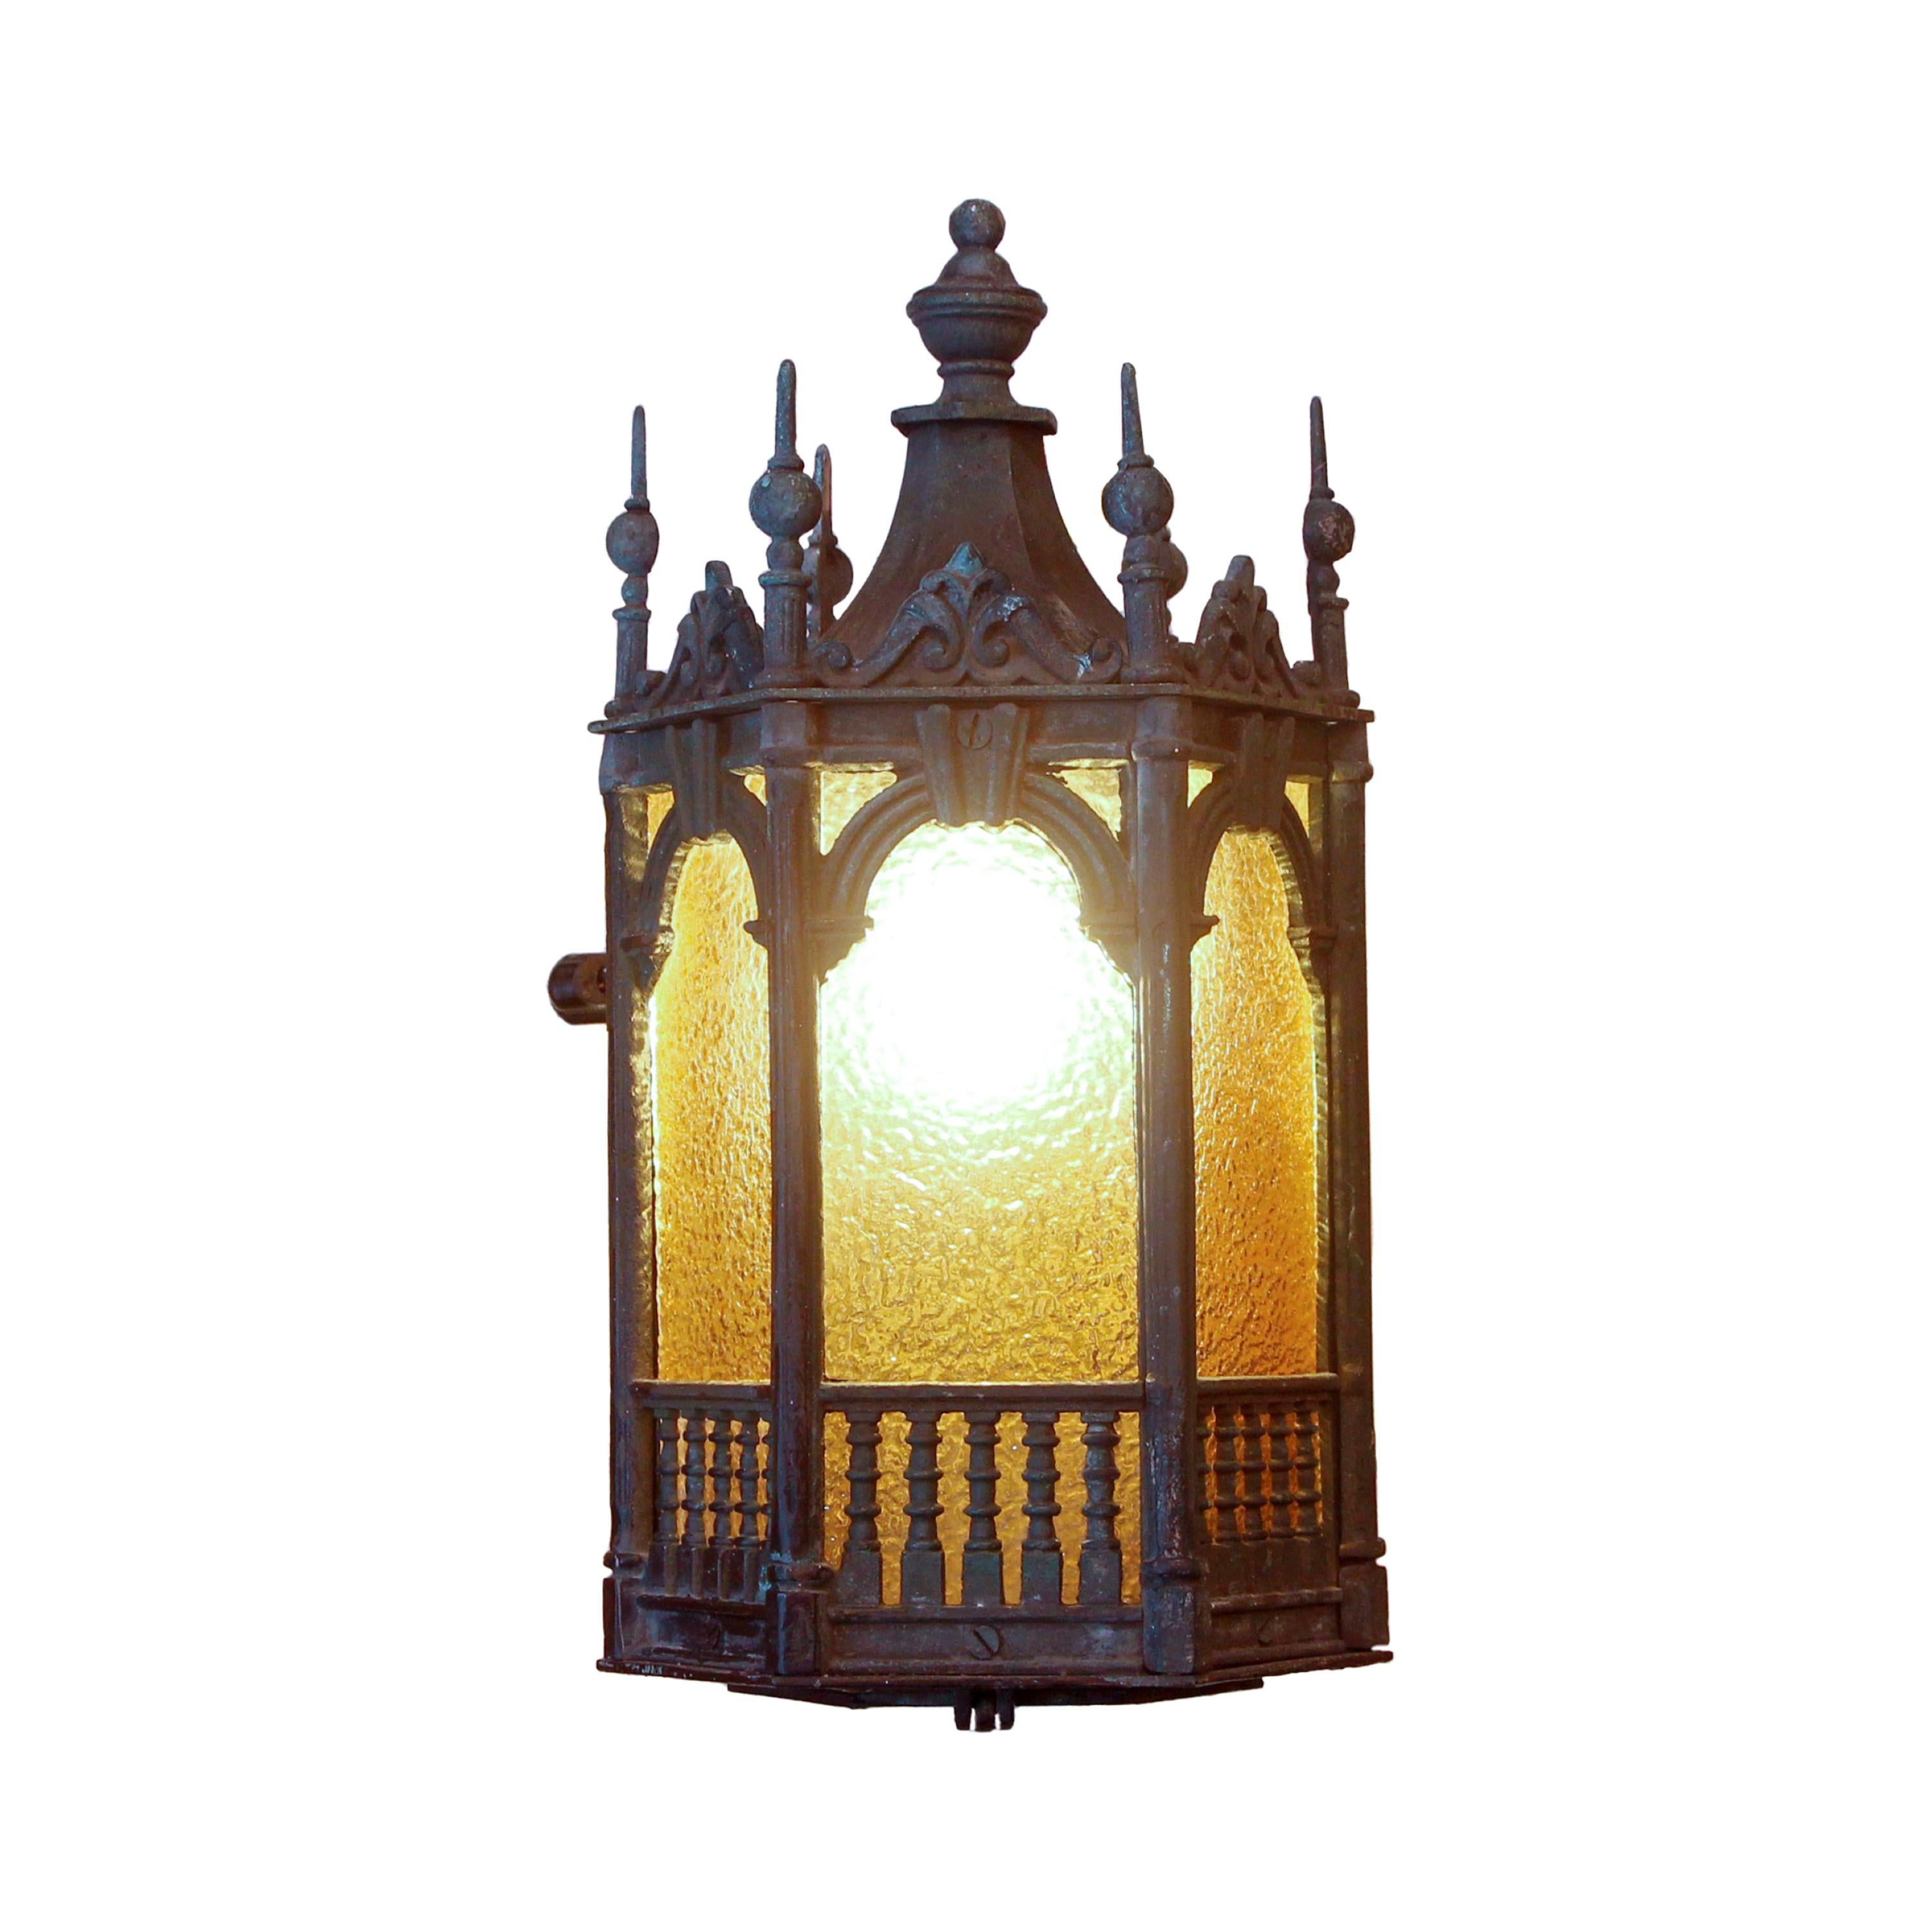 Pair of solid bronze Gothic wall sconces with a natural verdigris patina.  These lantern sconces feature textured amber glass panes. They are wired and ready to ship. Priced as a pair. Please note, this item is located in one of our NYC locations.

